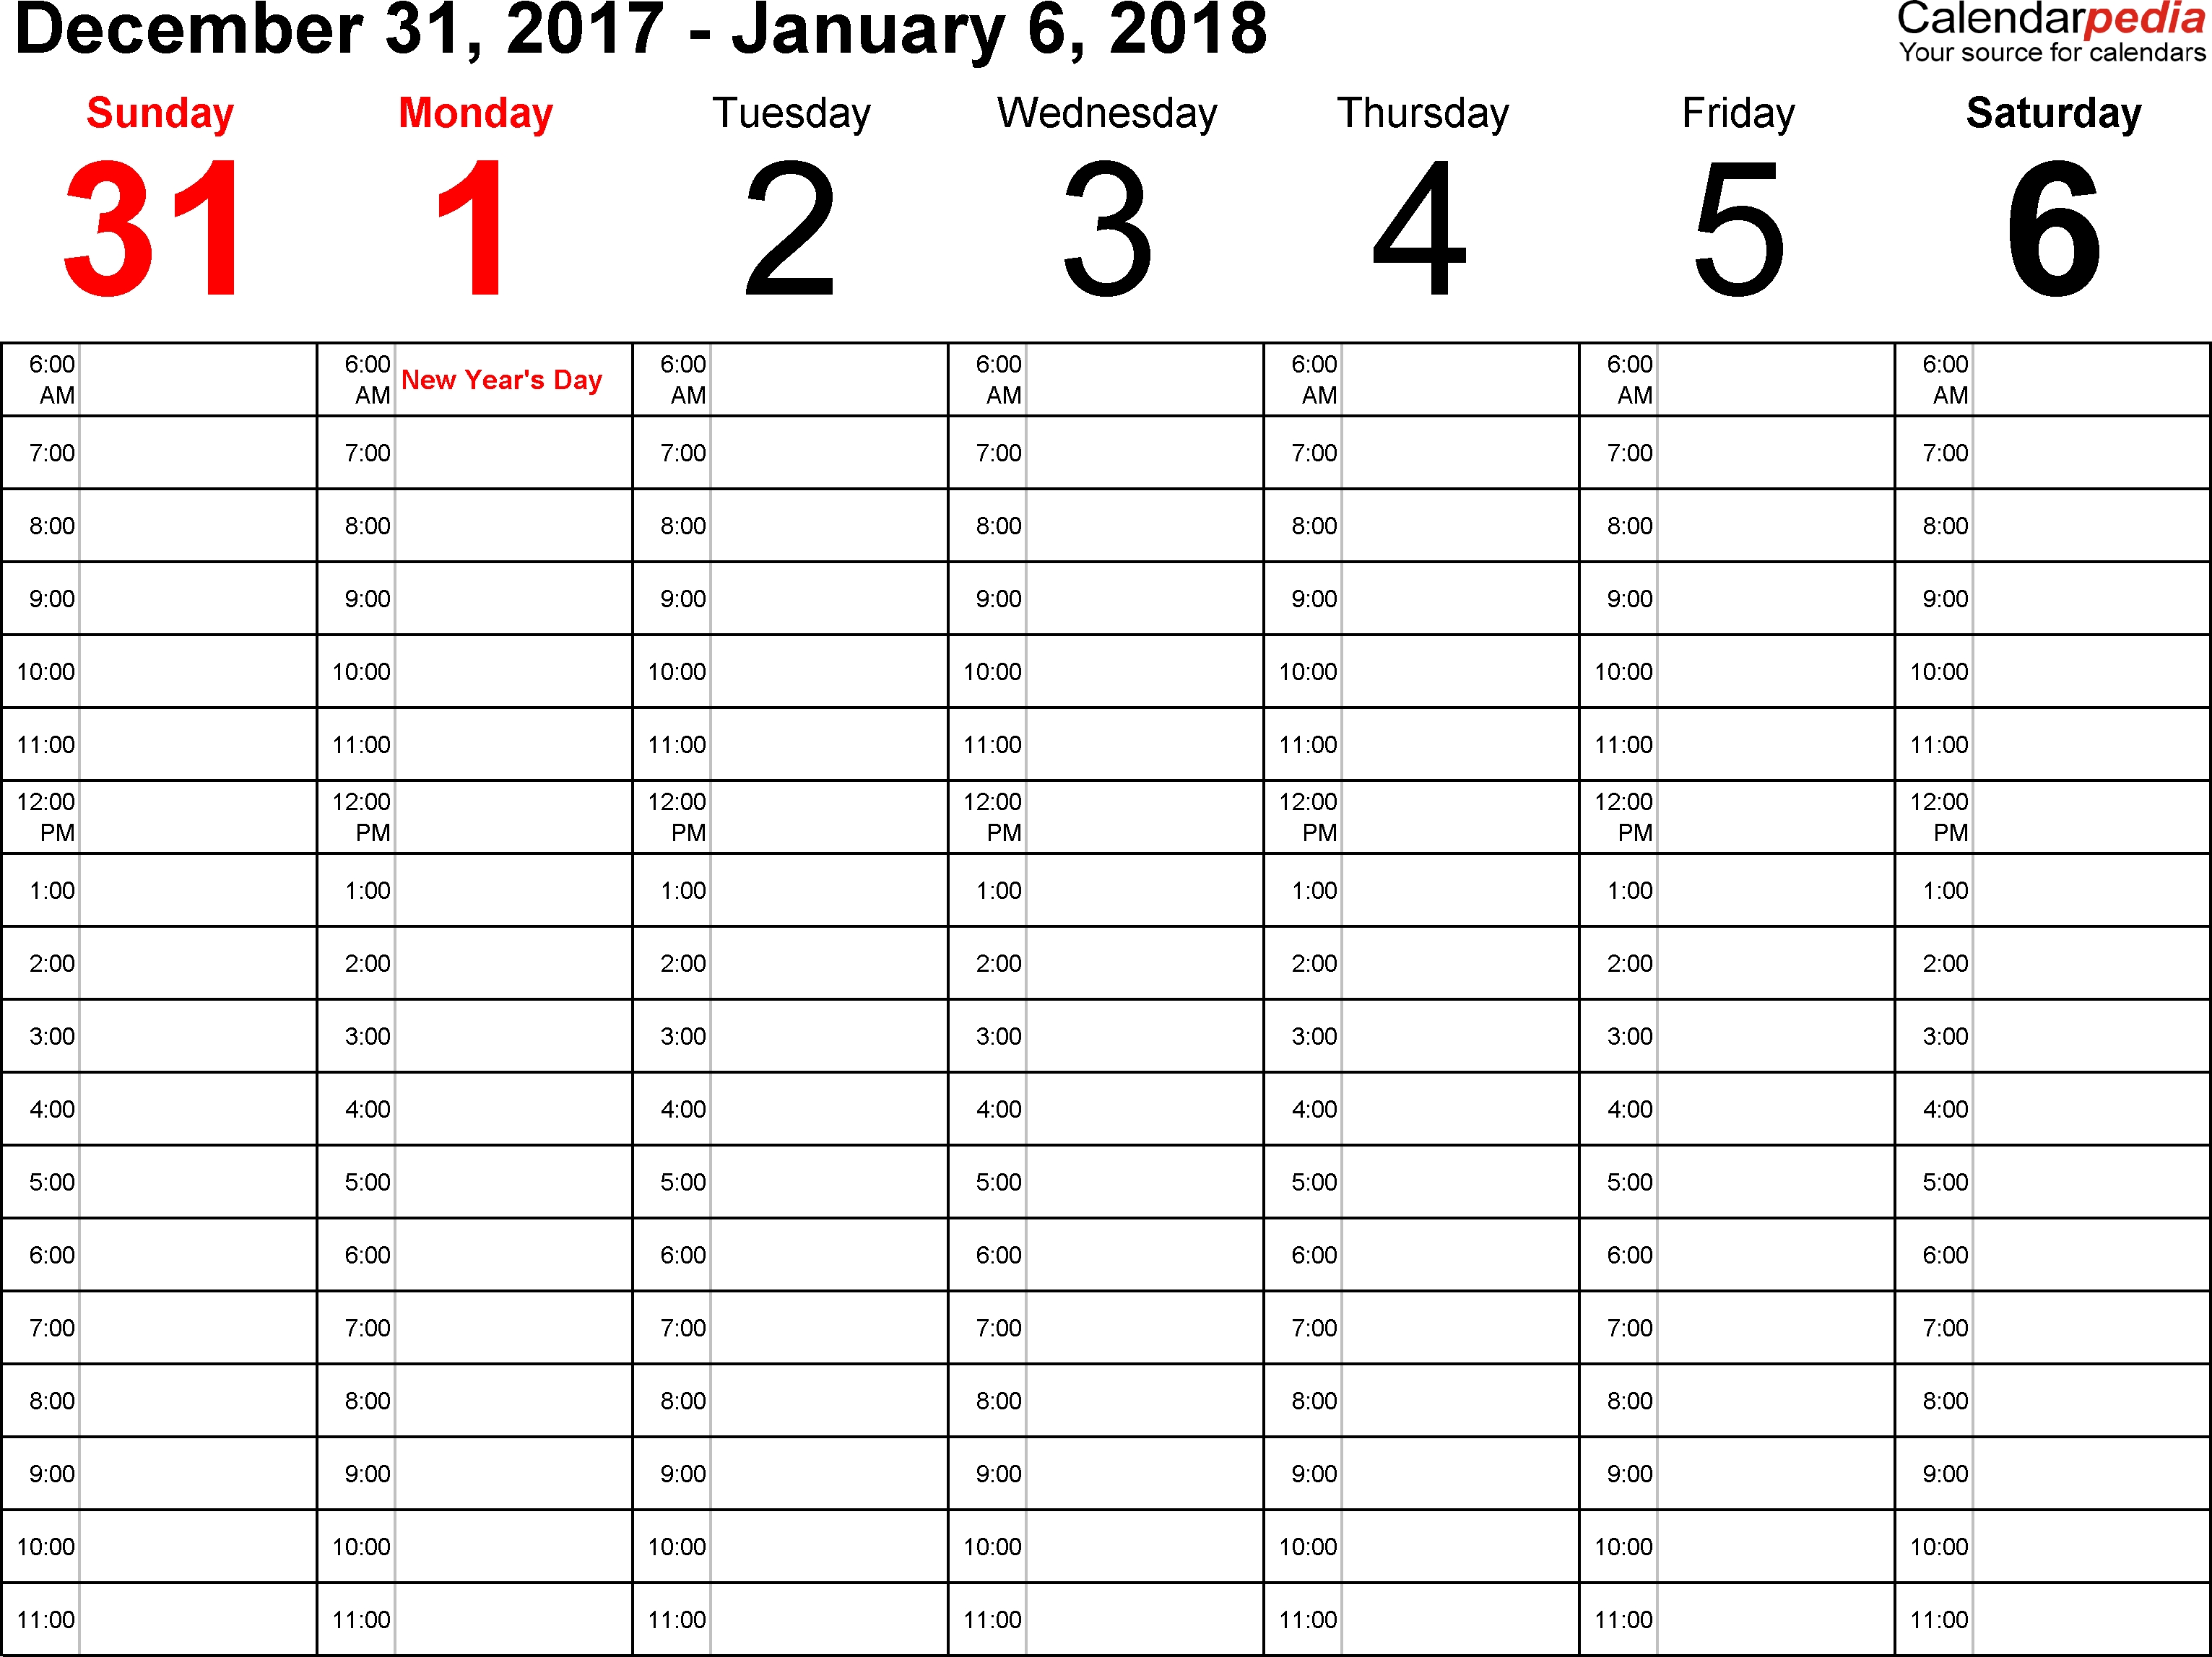 Weekly Calendar 2018 For Word - 12 Free Printable Templates regarding Empty Appointment Calendar One Month